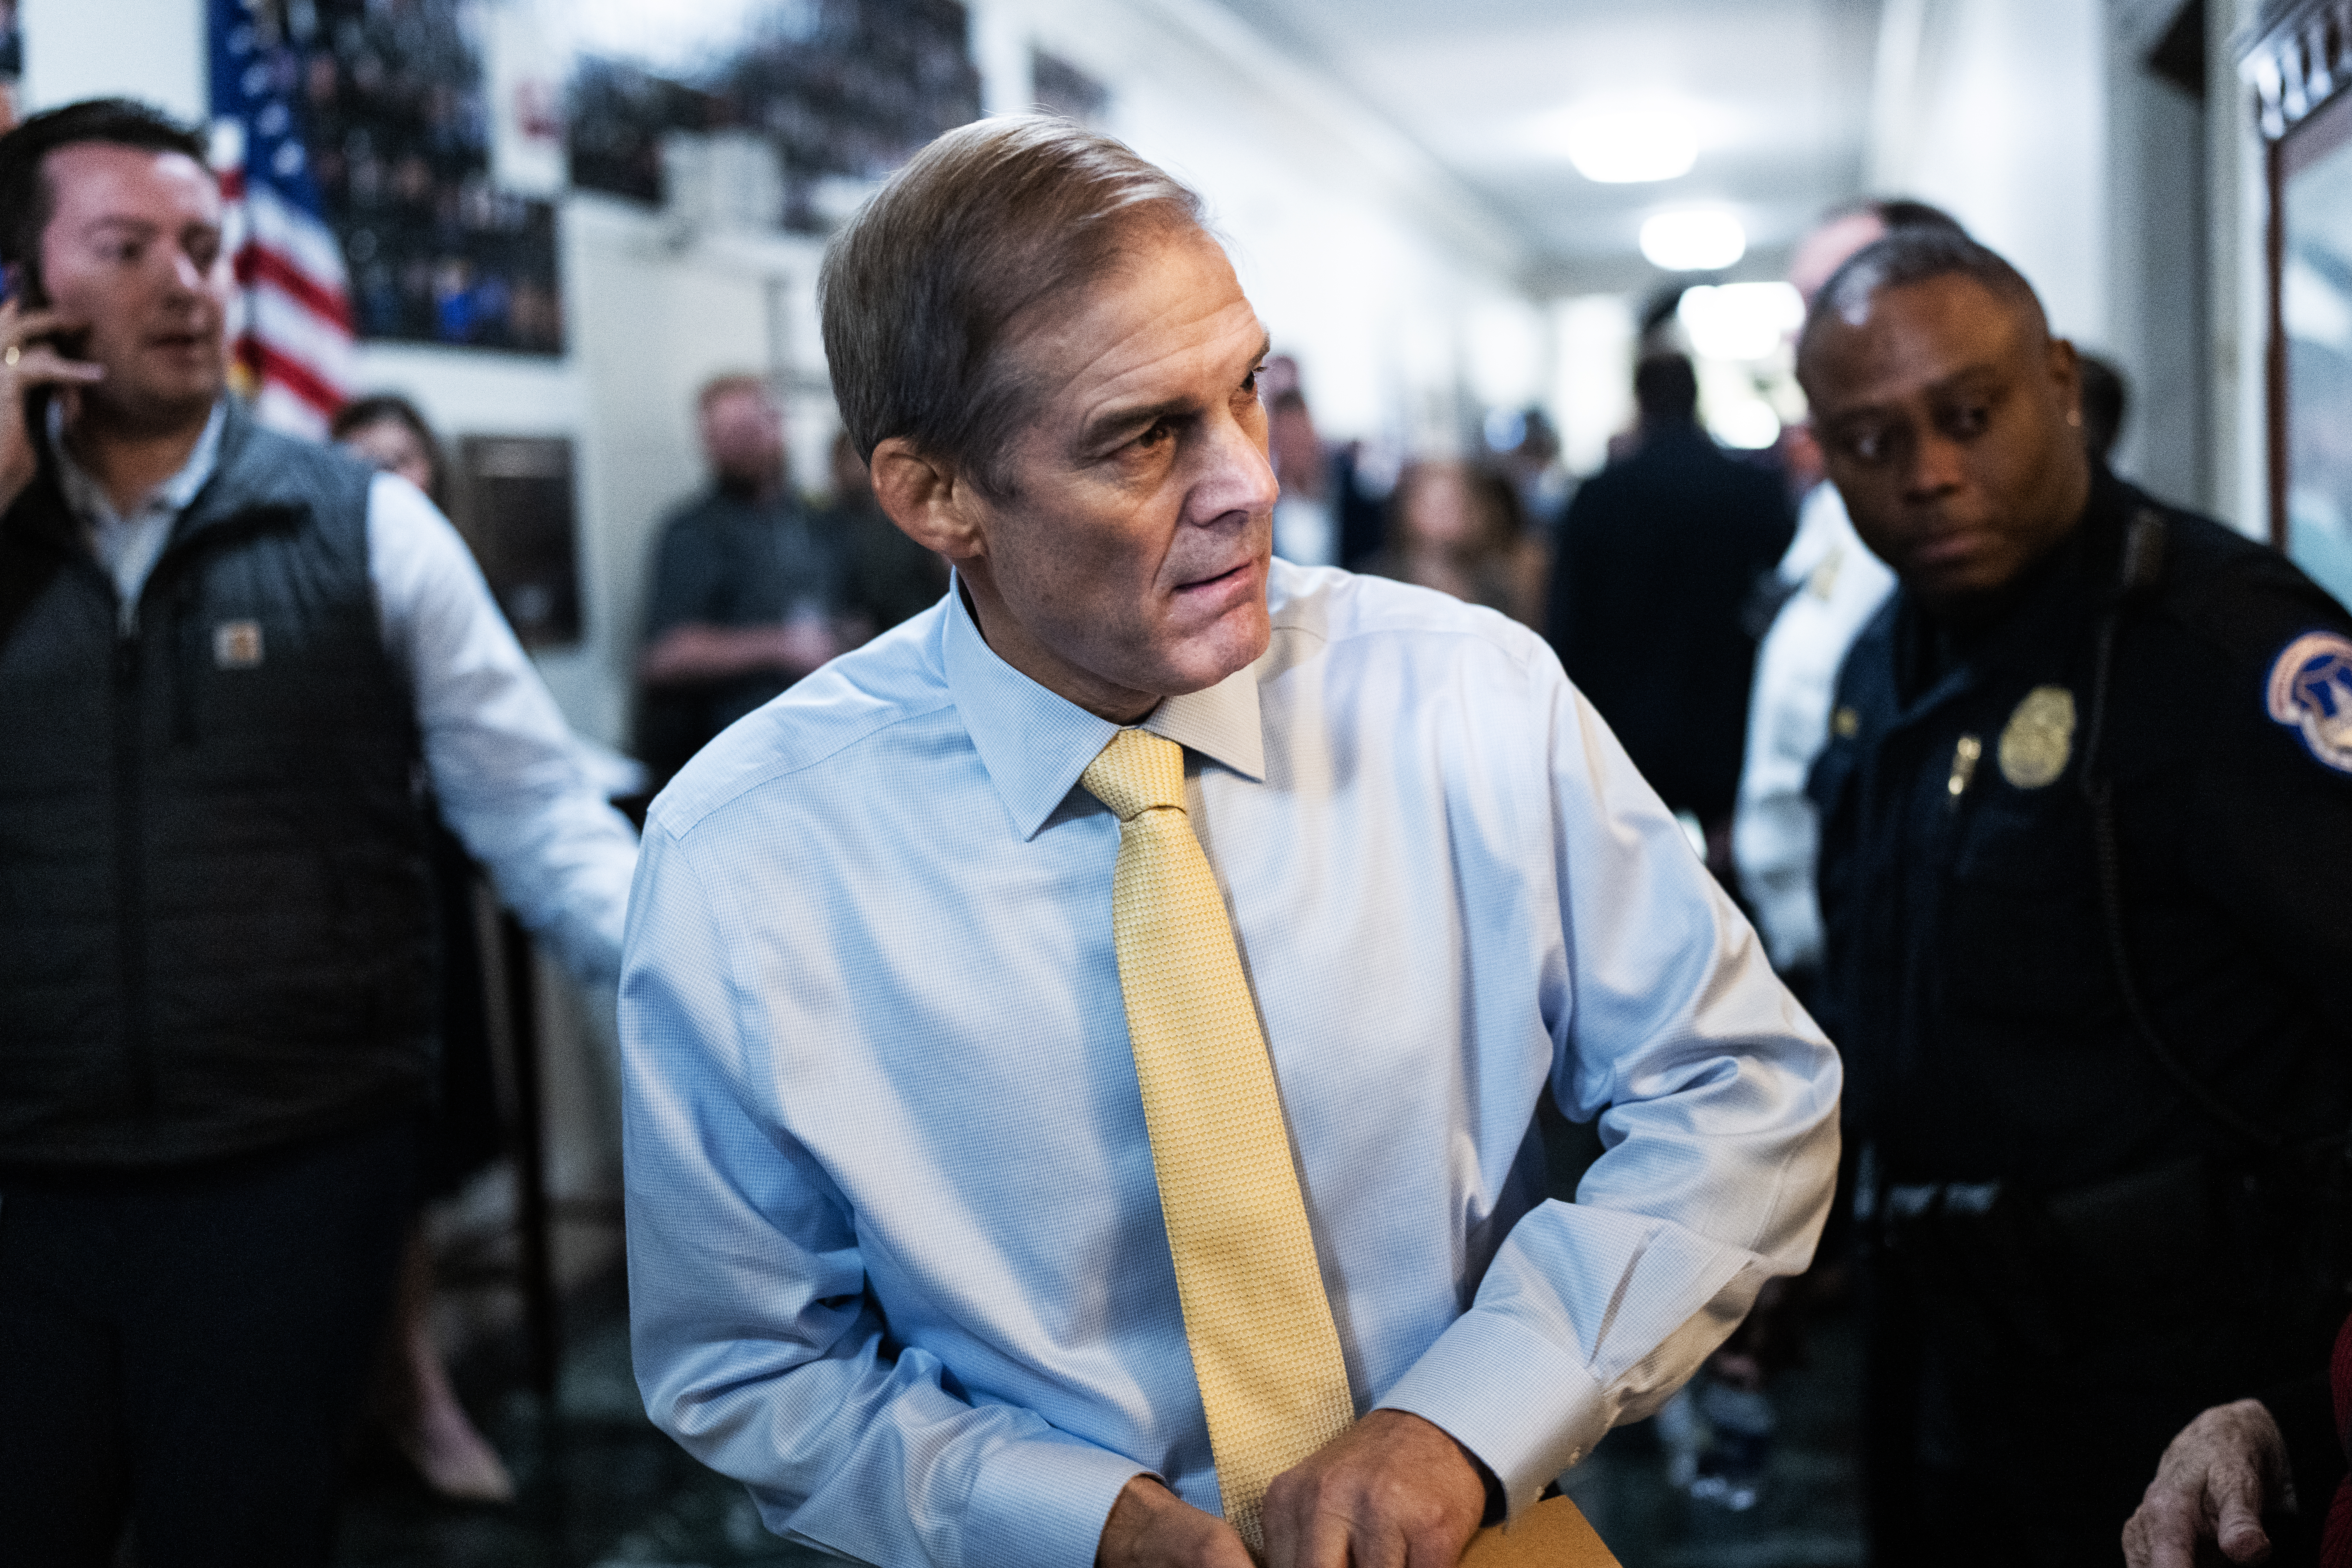 Jim Jordan wears a light blue dress shirt and light yellow tie. A security officer stands in the background.